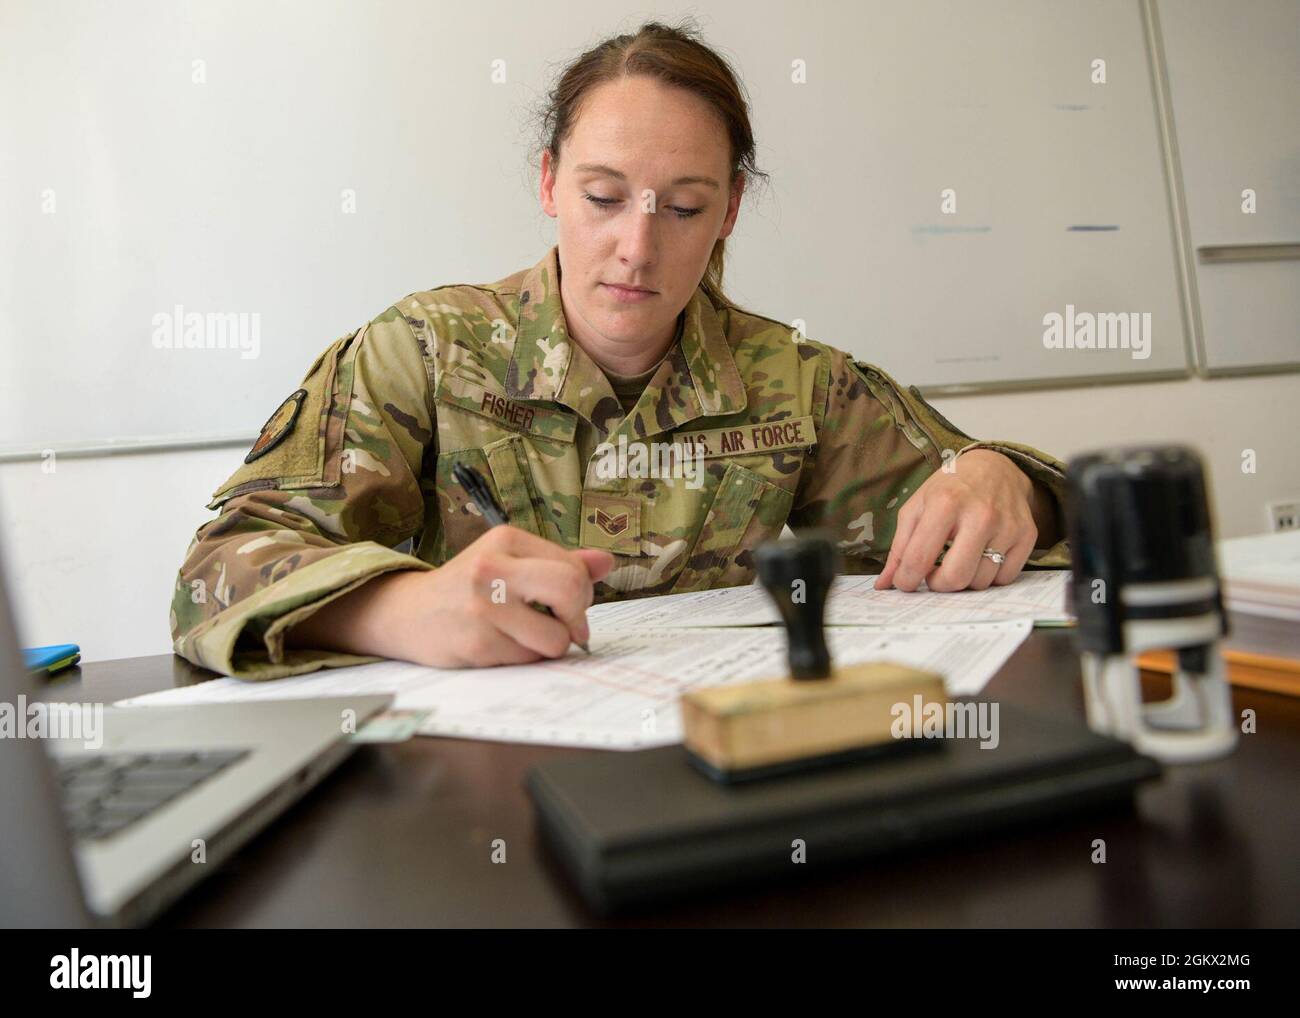 U.S. Air Force Staff Sgt. Kaitlyn Fisher, 31st Logistics Readiness Squadron traffic management office customs clearance officer, clears AE 302 customs import documents during exercise Thracian Star 21 at Graf Ignatievo Air Base, Bulgaria, July 14, 2021. An AE 302 customs report allows military cargo to travel through NATO countries without being subject to taxes. Stock Photo